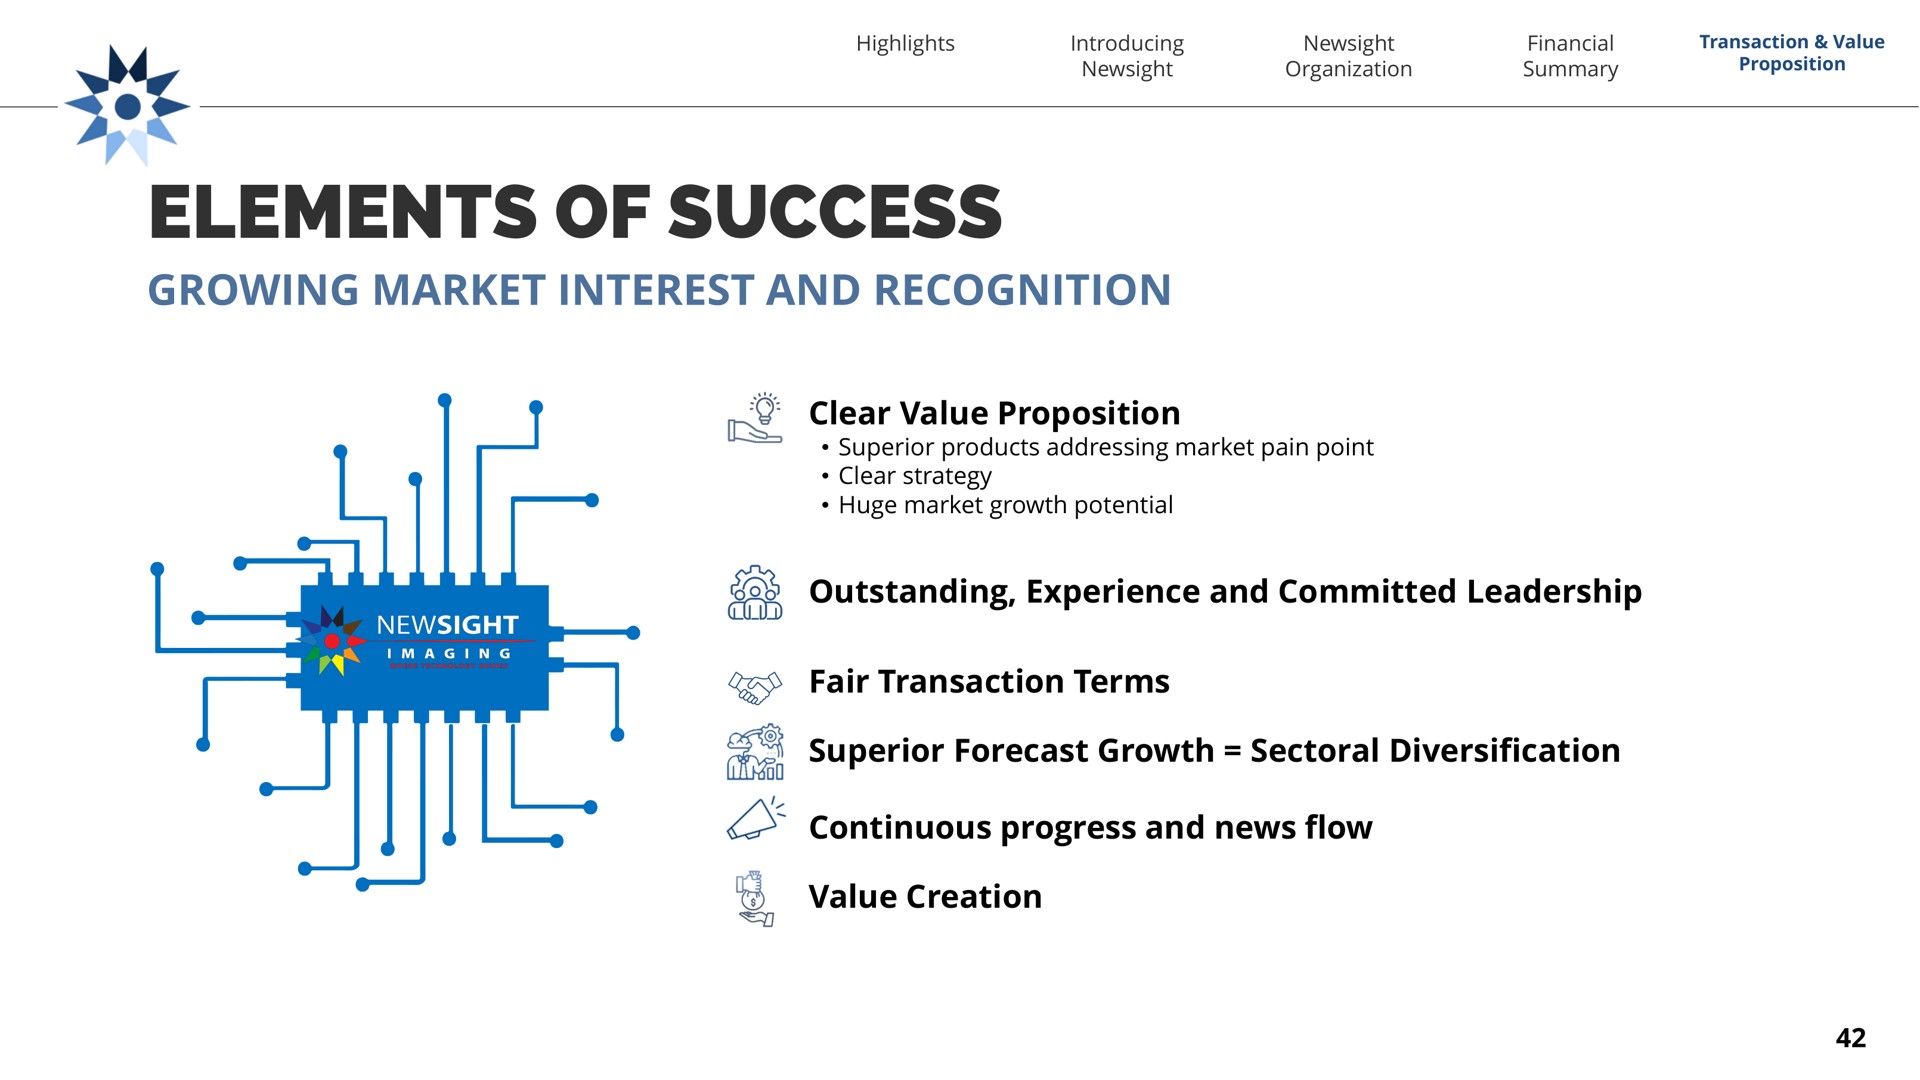 elements of success clear value proposition superior products addressing market pain point clear strategy huge market growth potential outstanding experience and committed leadership fair transaction terms superior forecast growth sectoral diversification continuous progress and news flow value creation growing interest recognition gob | Newsight Imaging